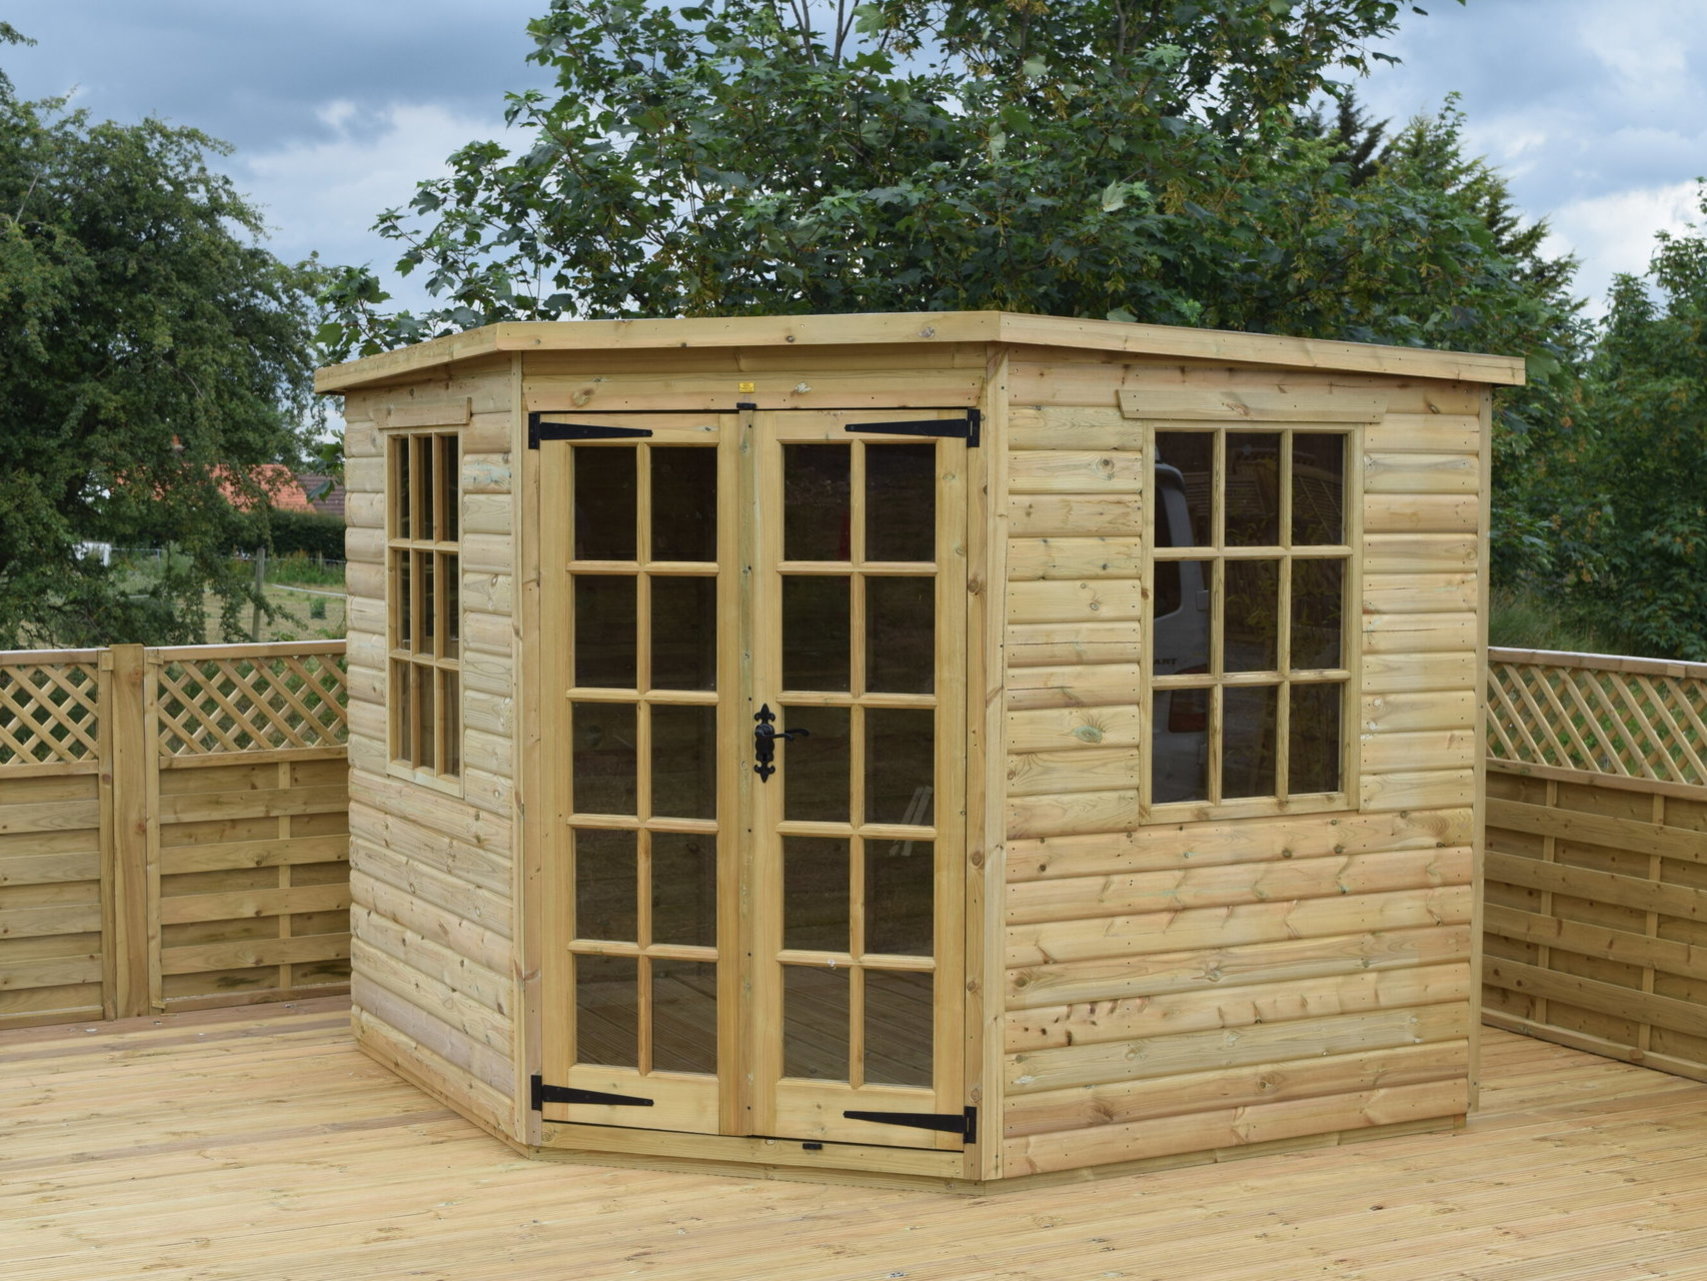 A wooden garden shed